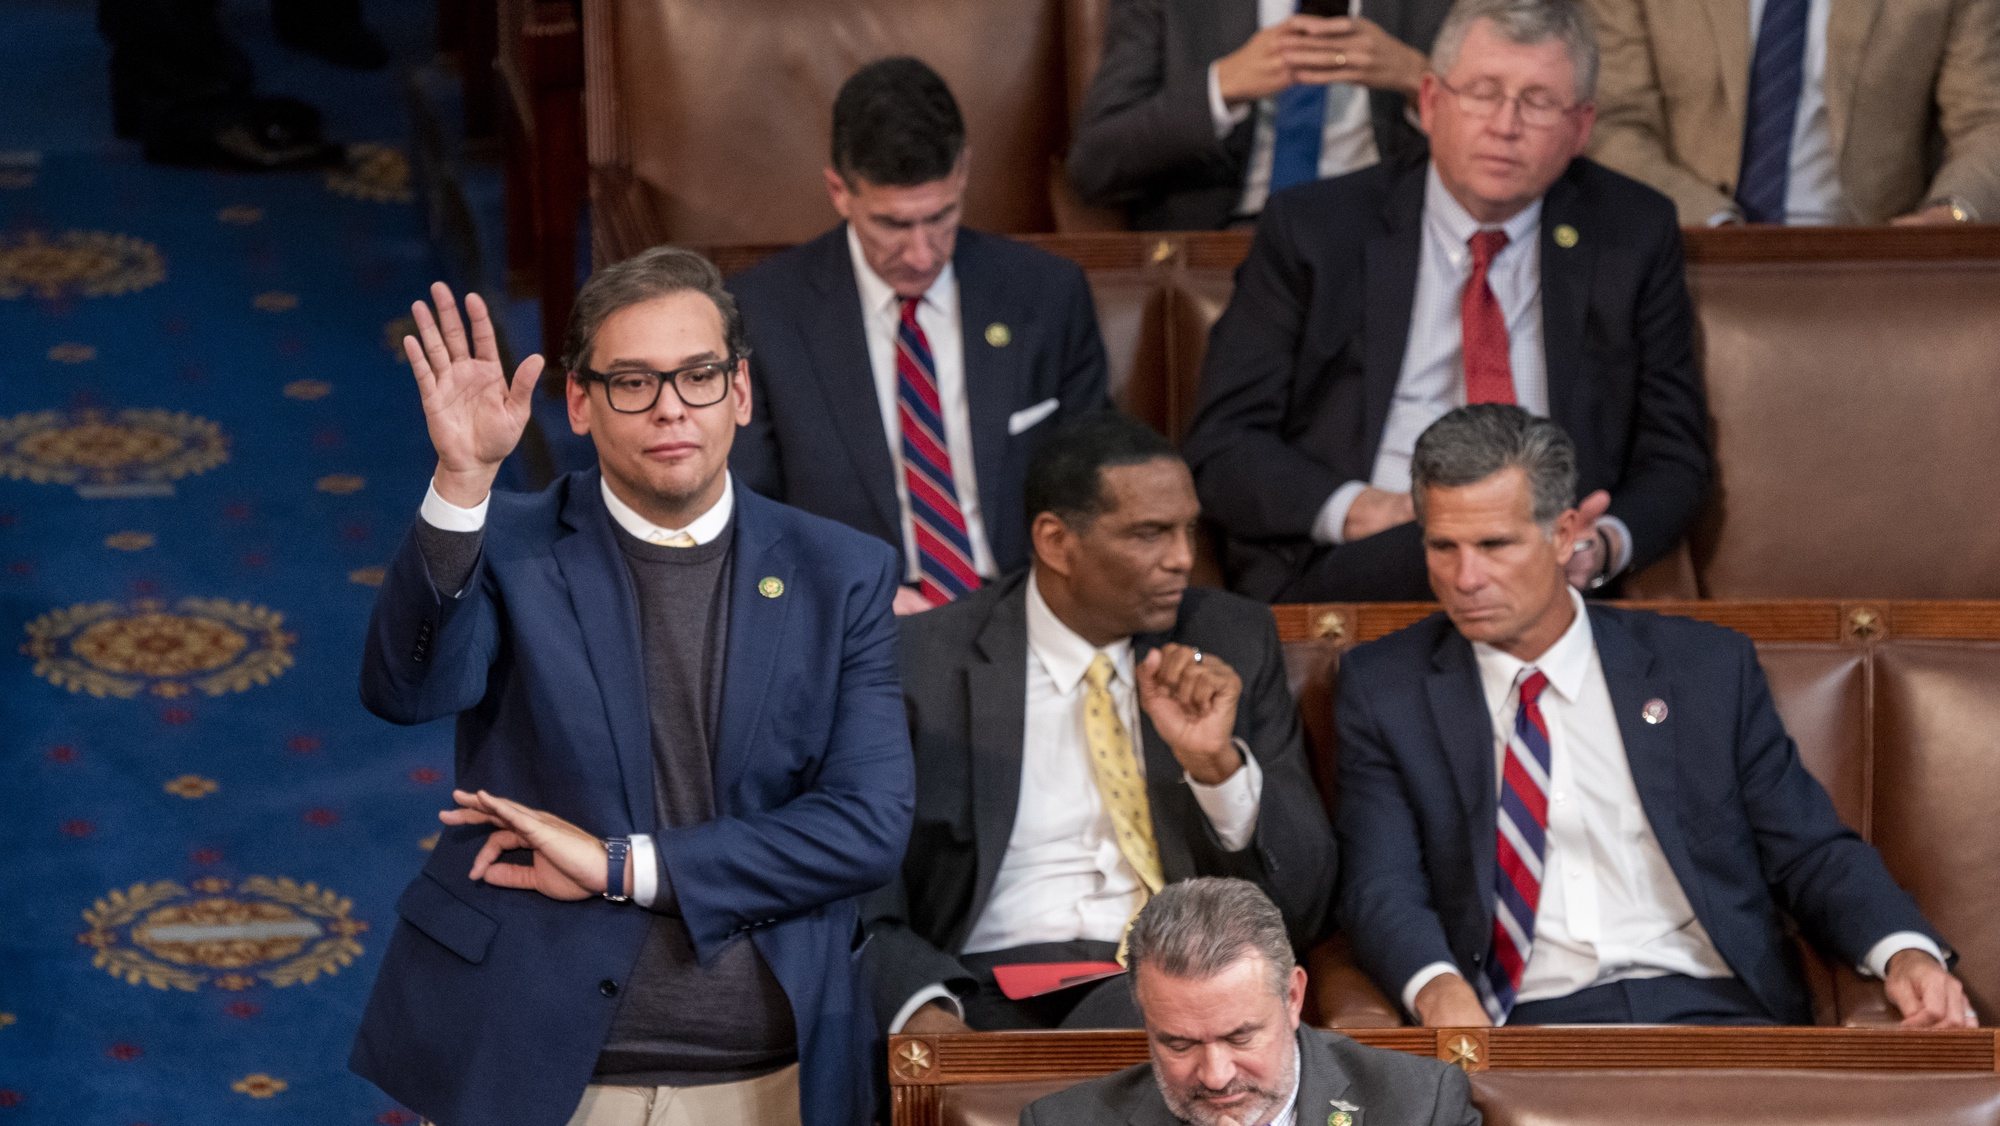 epa10391240 Republican Representative elect from New York George Santos gestures as he votes in the House chamber on the third day of the House of Representatives trying to determine who will become the next Speaker of the House, on Capitol Hill in Washington, DC, USA 05 January 2023. After numerous rounds of voting McCarthy has failed to secure enough votes to become House Speaker and faces serious opposition from his own Republican caucus, putting his bid for Speaker of the House in jeopardy.  EPA/SHAWN THEW